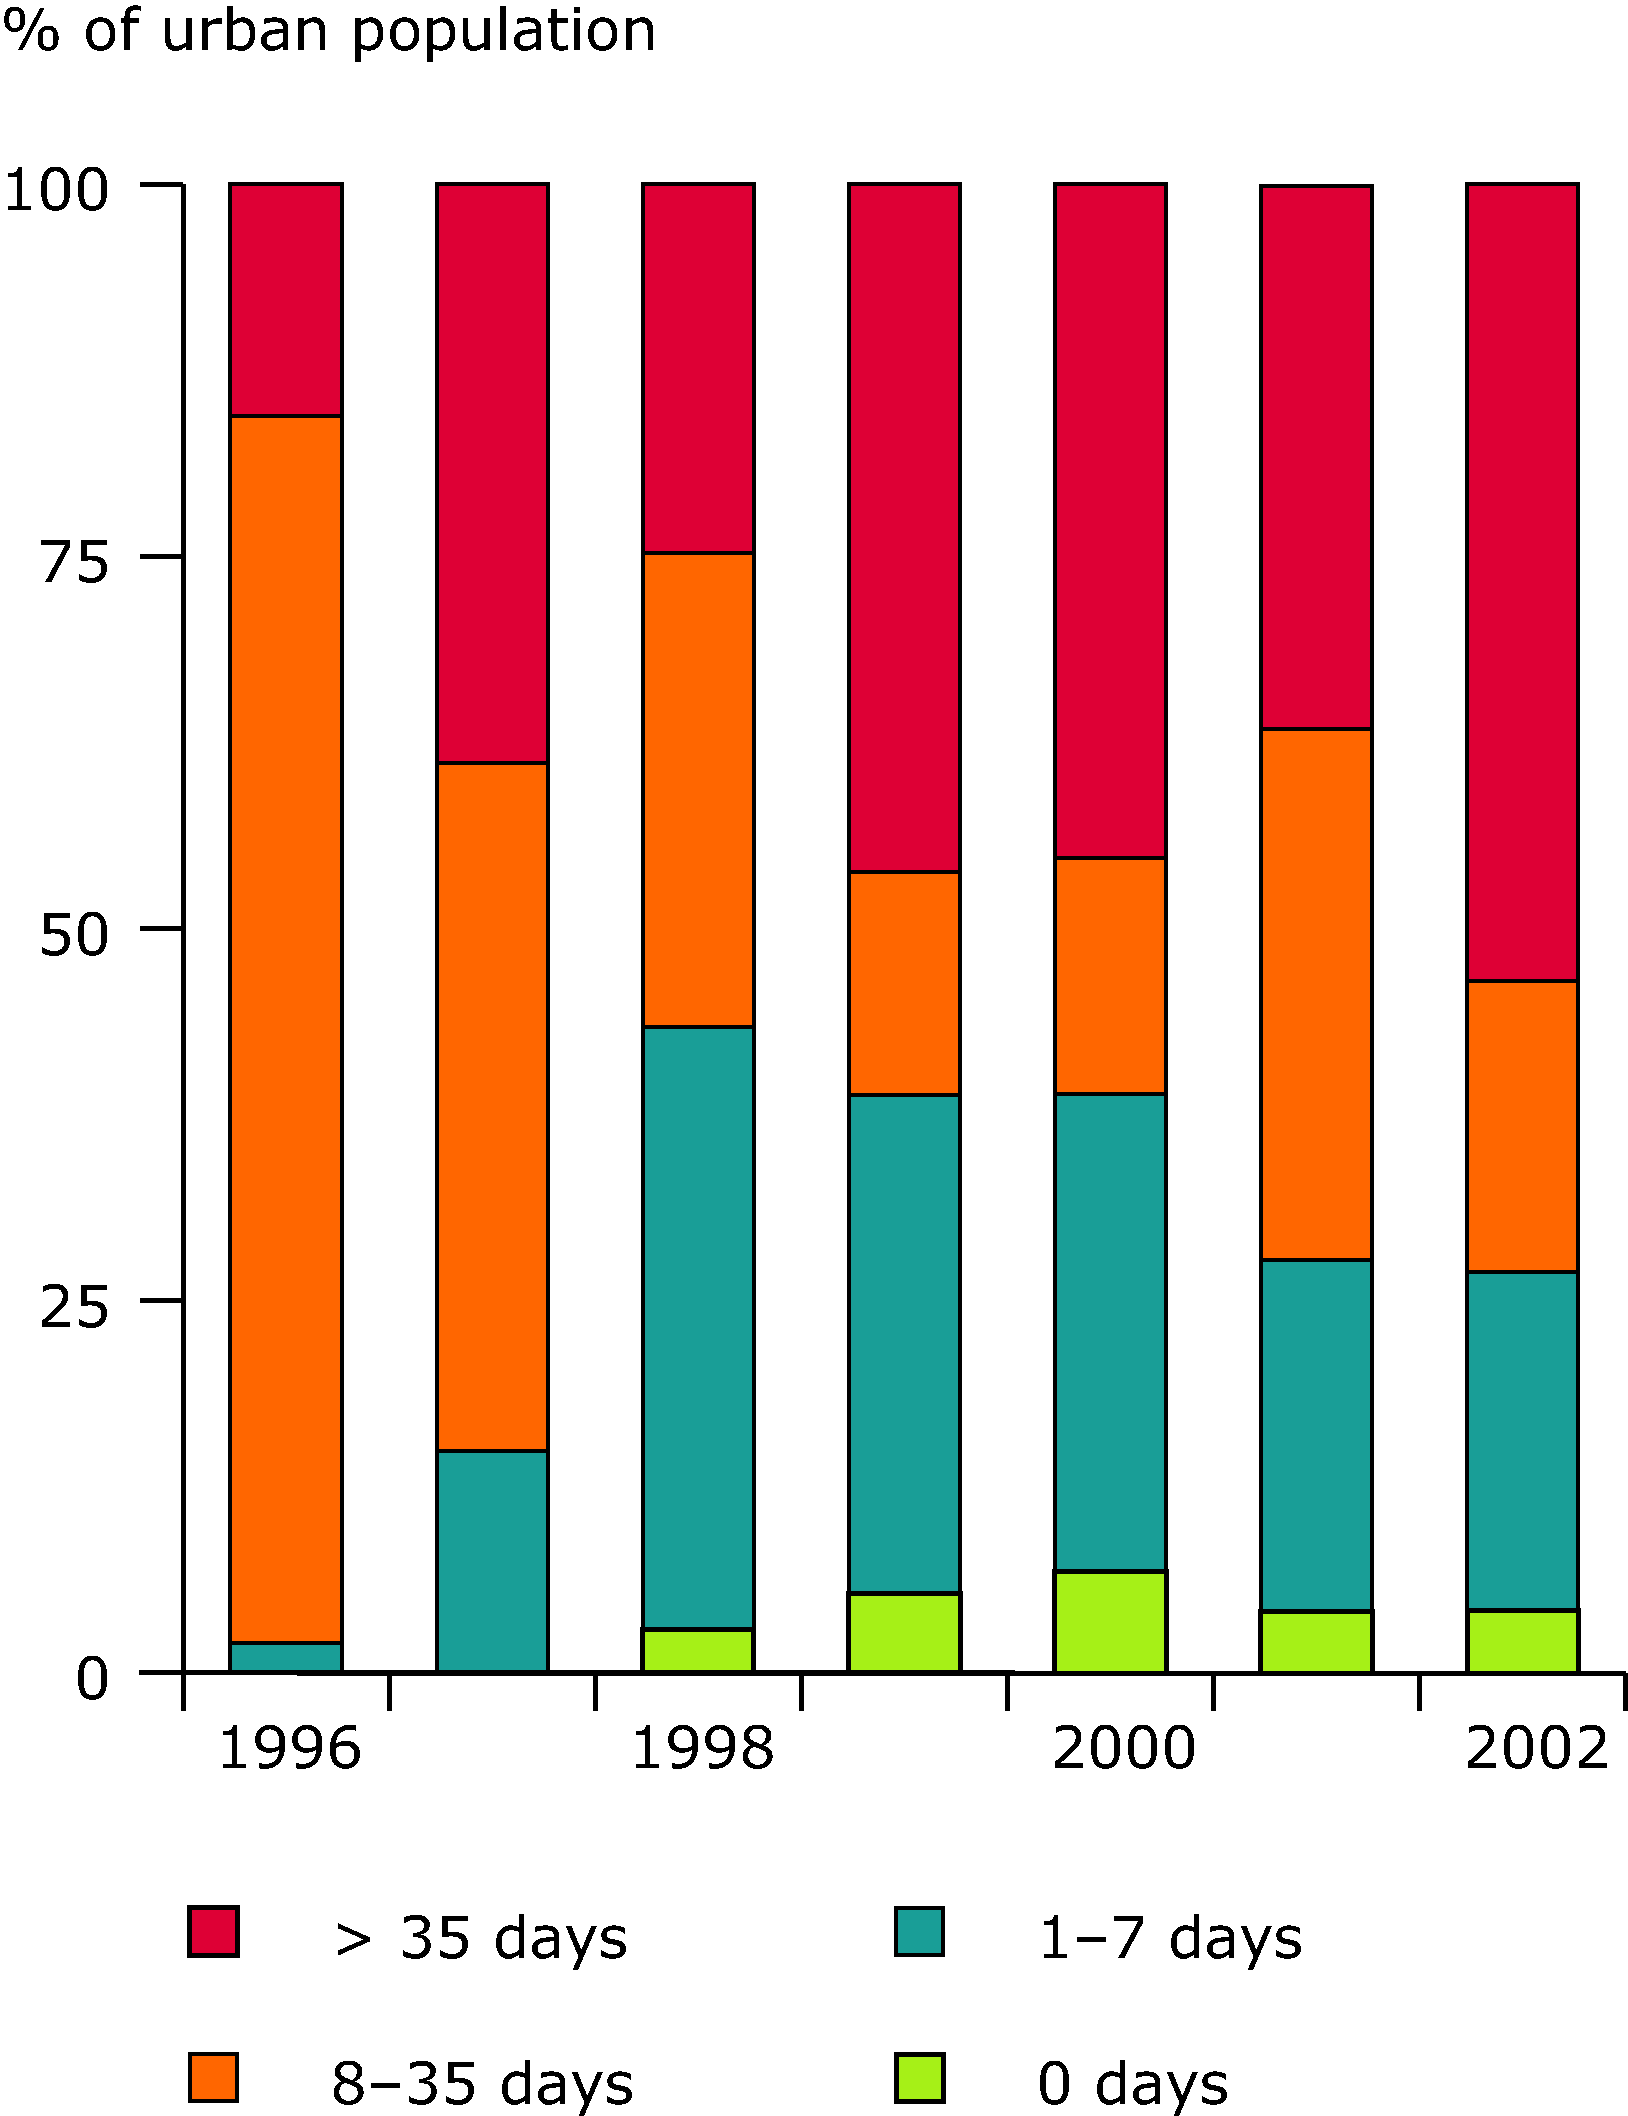 Exceedance of air quality limit value of PM10 in urban areas (EEA member countries), 1996-2002